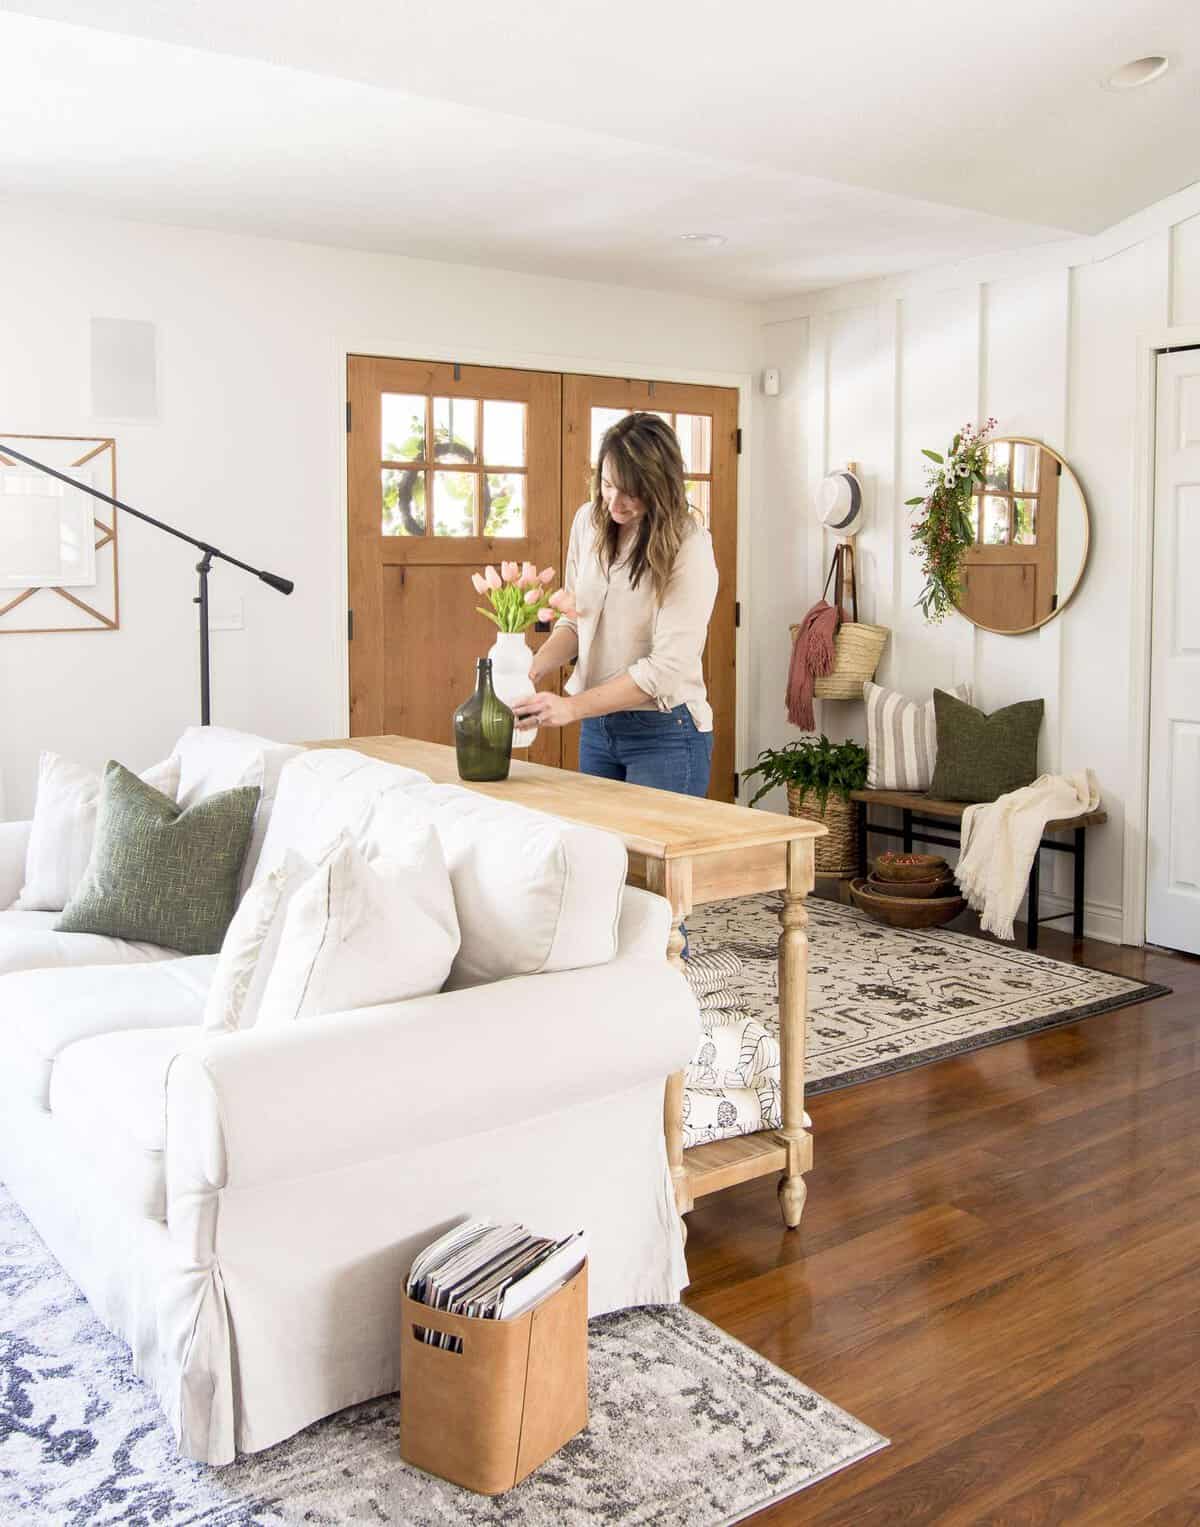 Decorating on a budget by shopping your home.